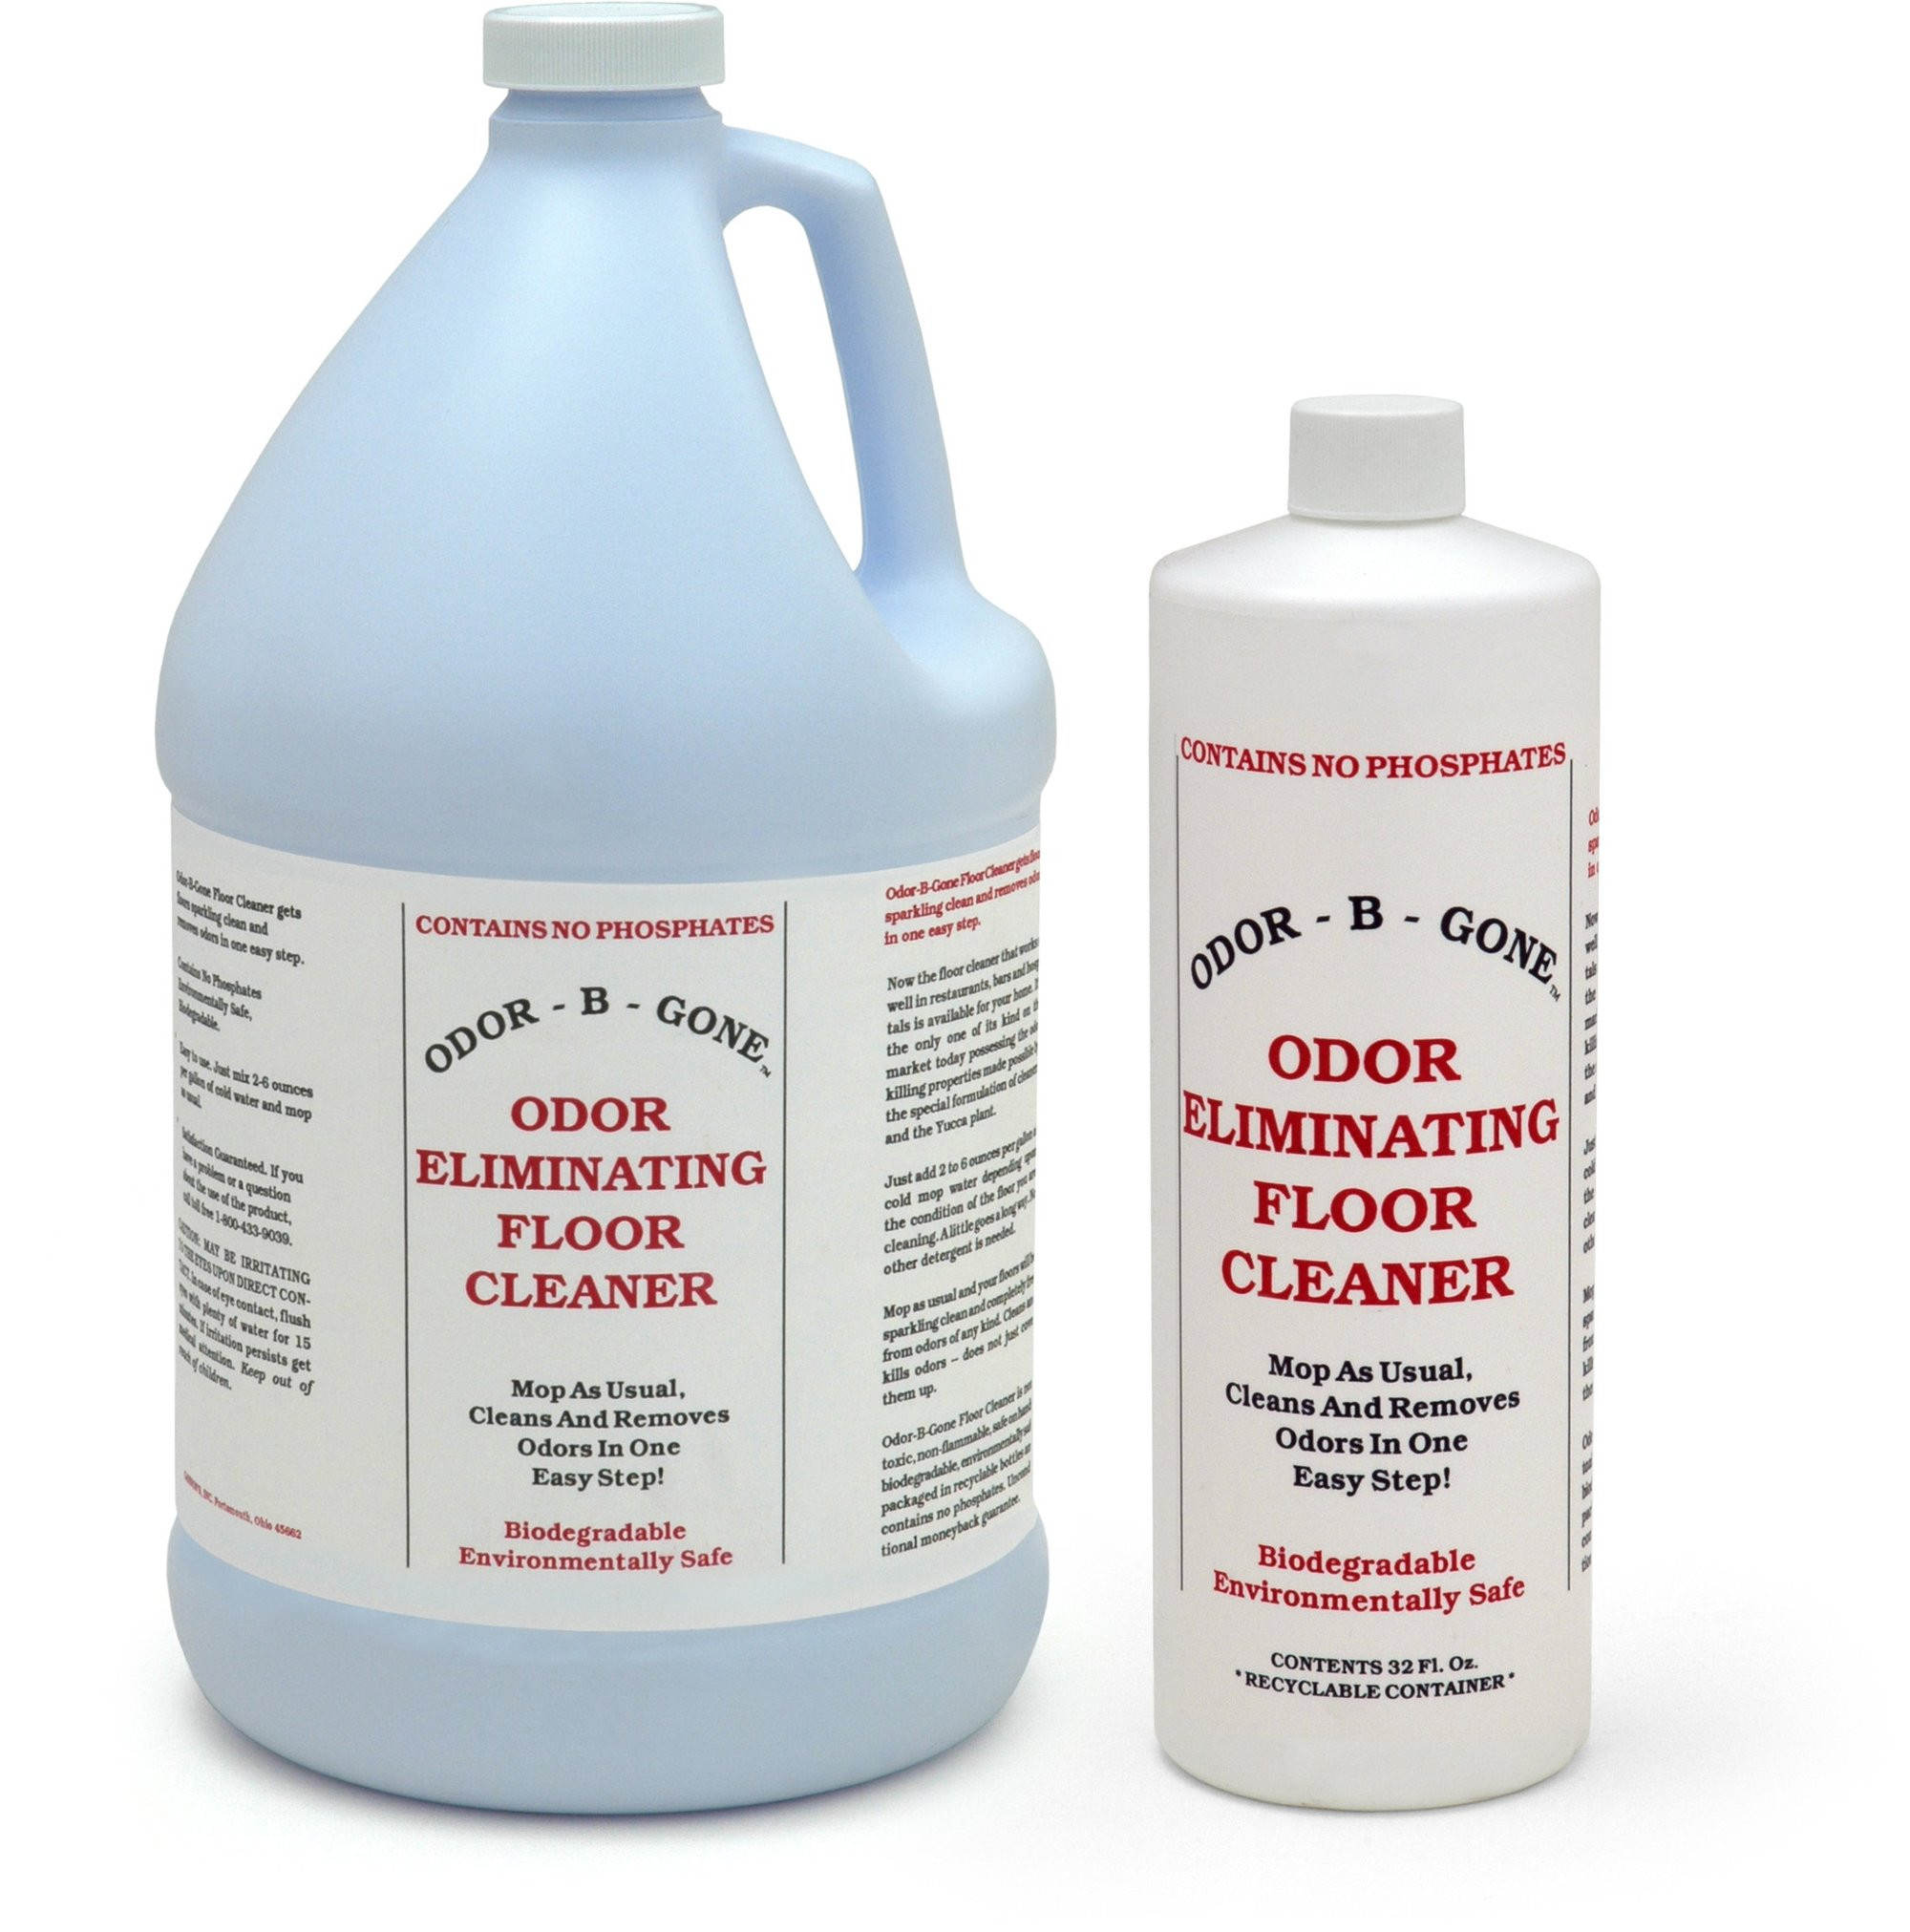 hardwood floor cleaning products of odor eliminating floor cleaner odorbgoneproducts for odor eliminating floor cleaner 2000x